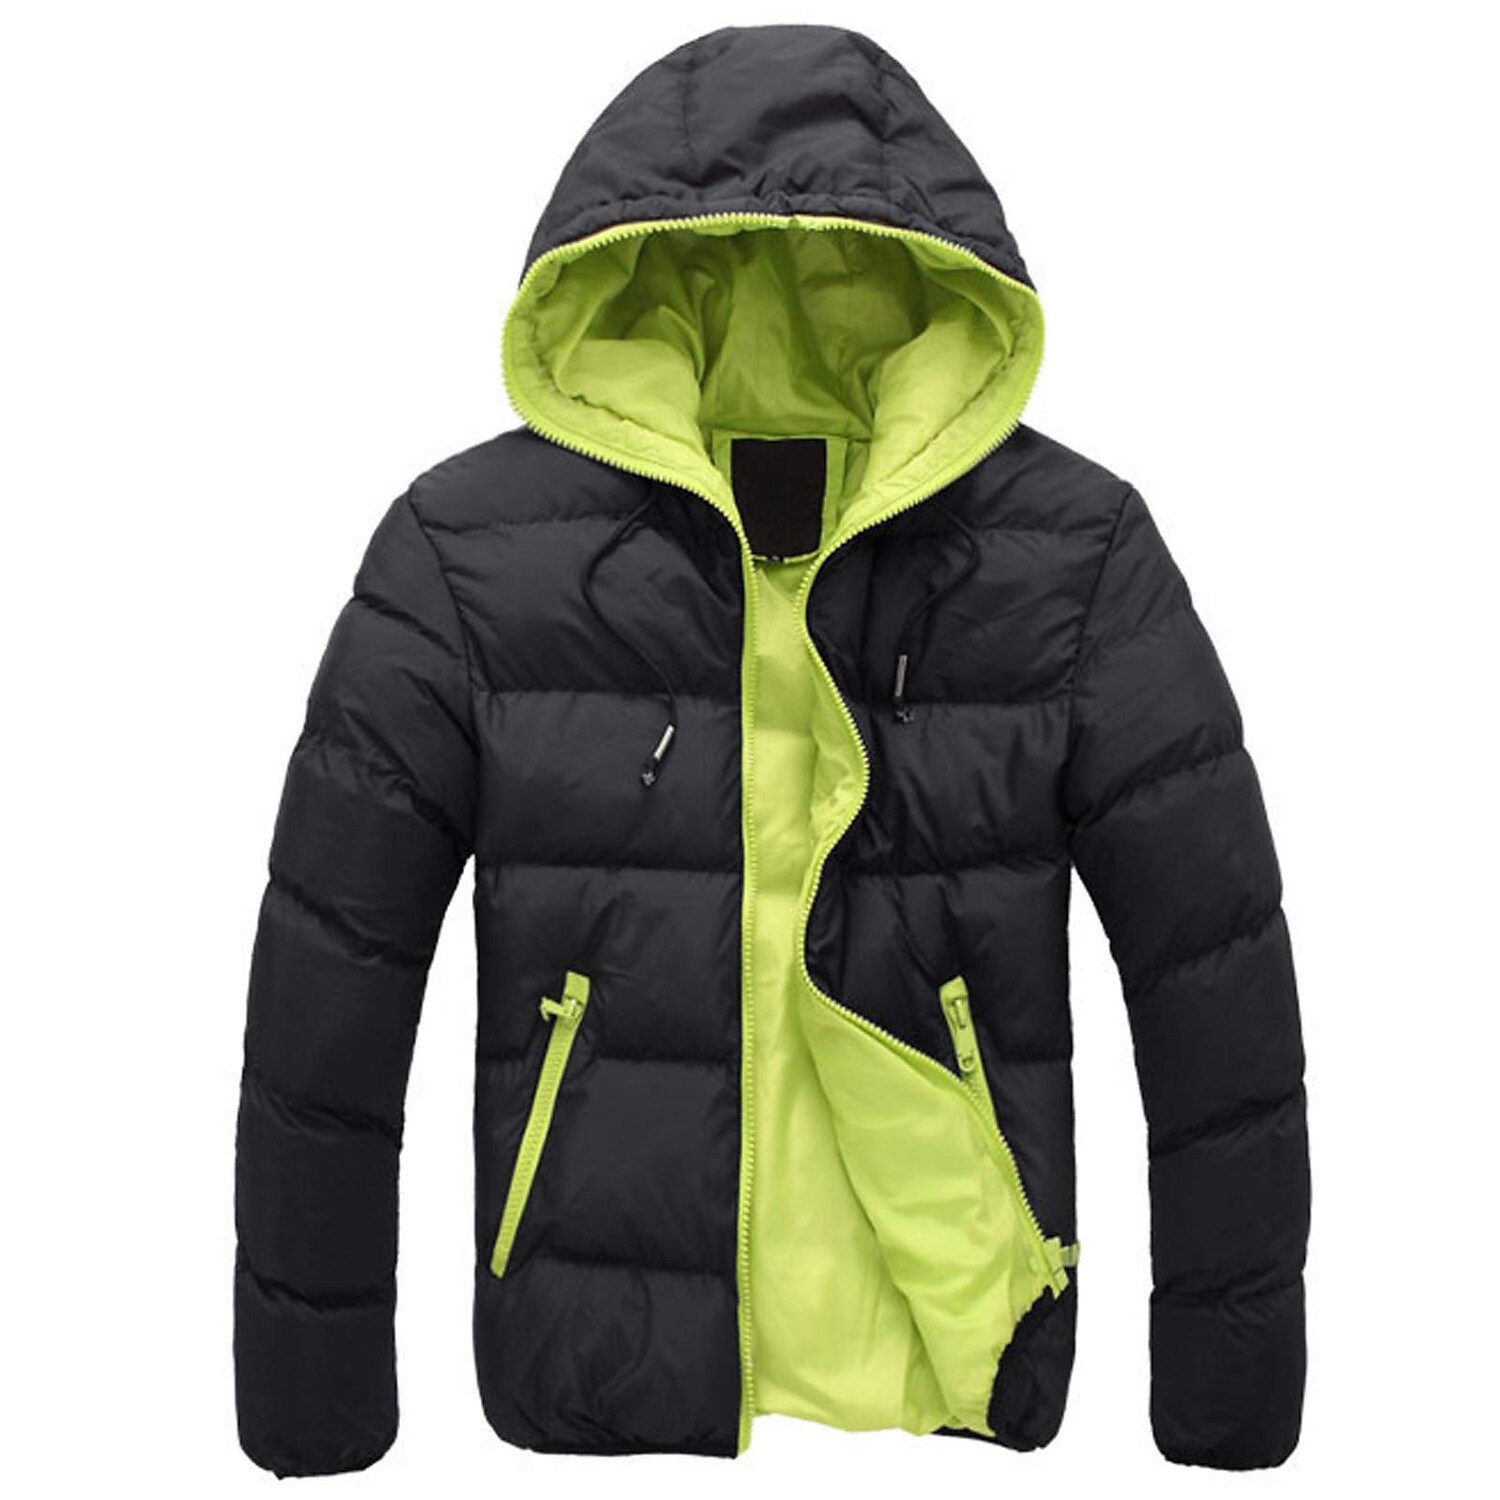 Gymstugan Winter Puffer Jacket Coat Windproof Casual Daily Color Block Outerwear